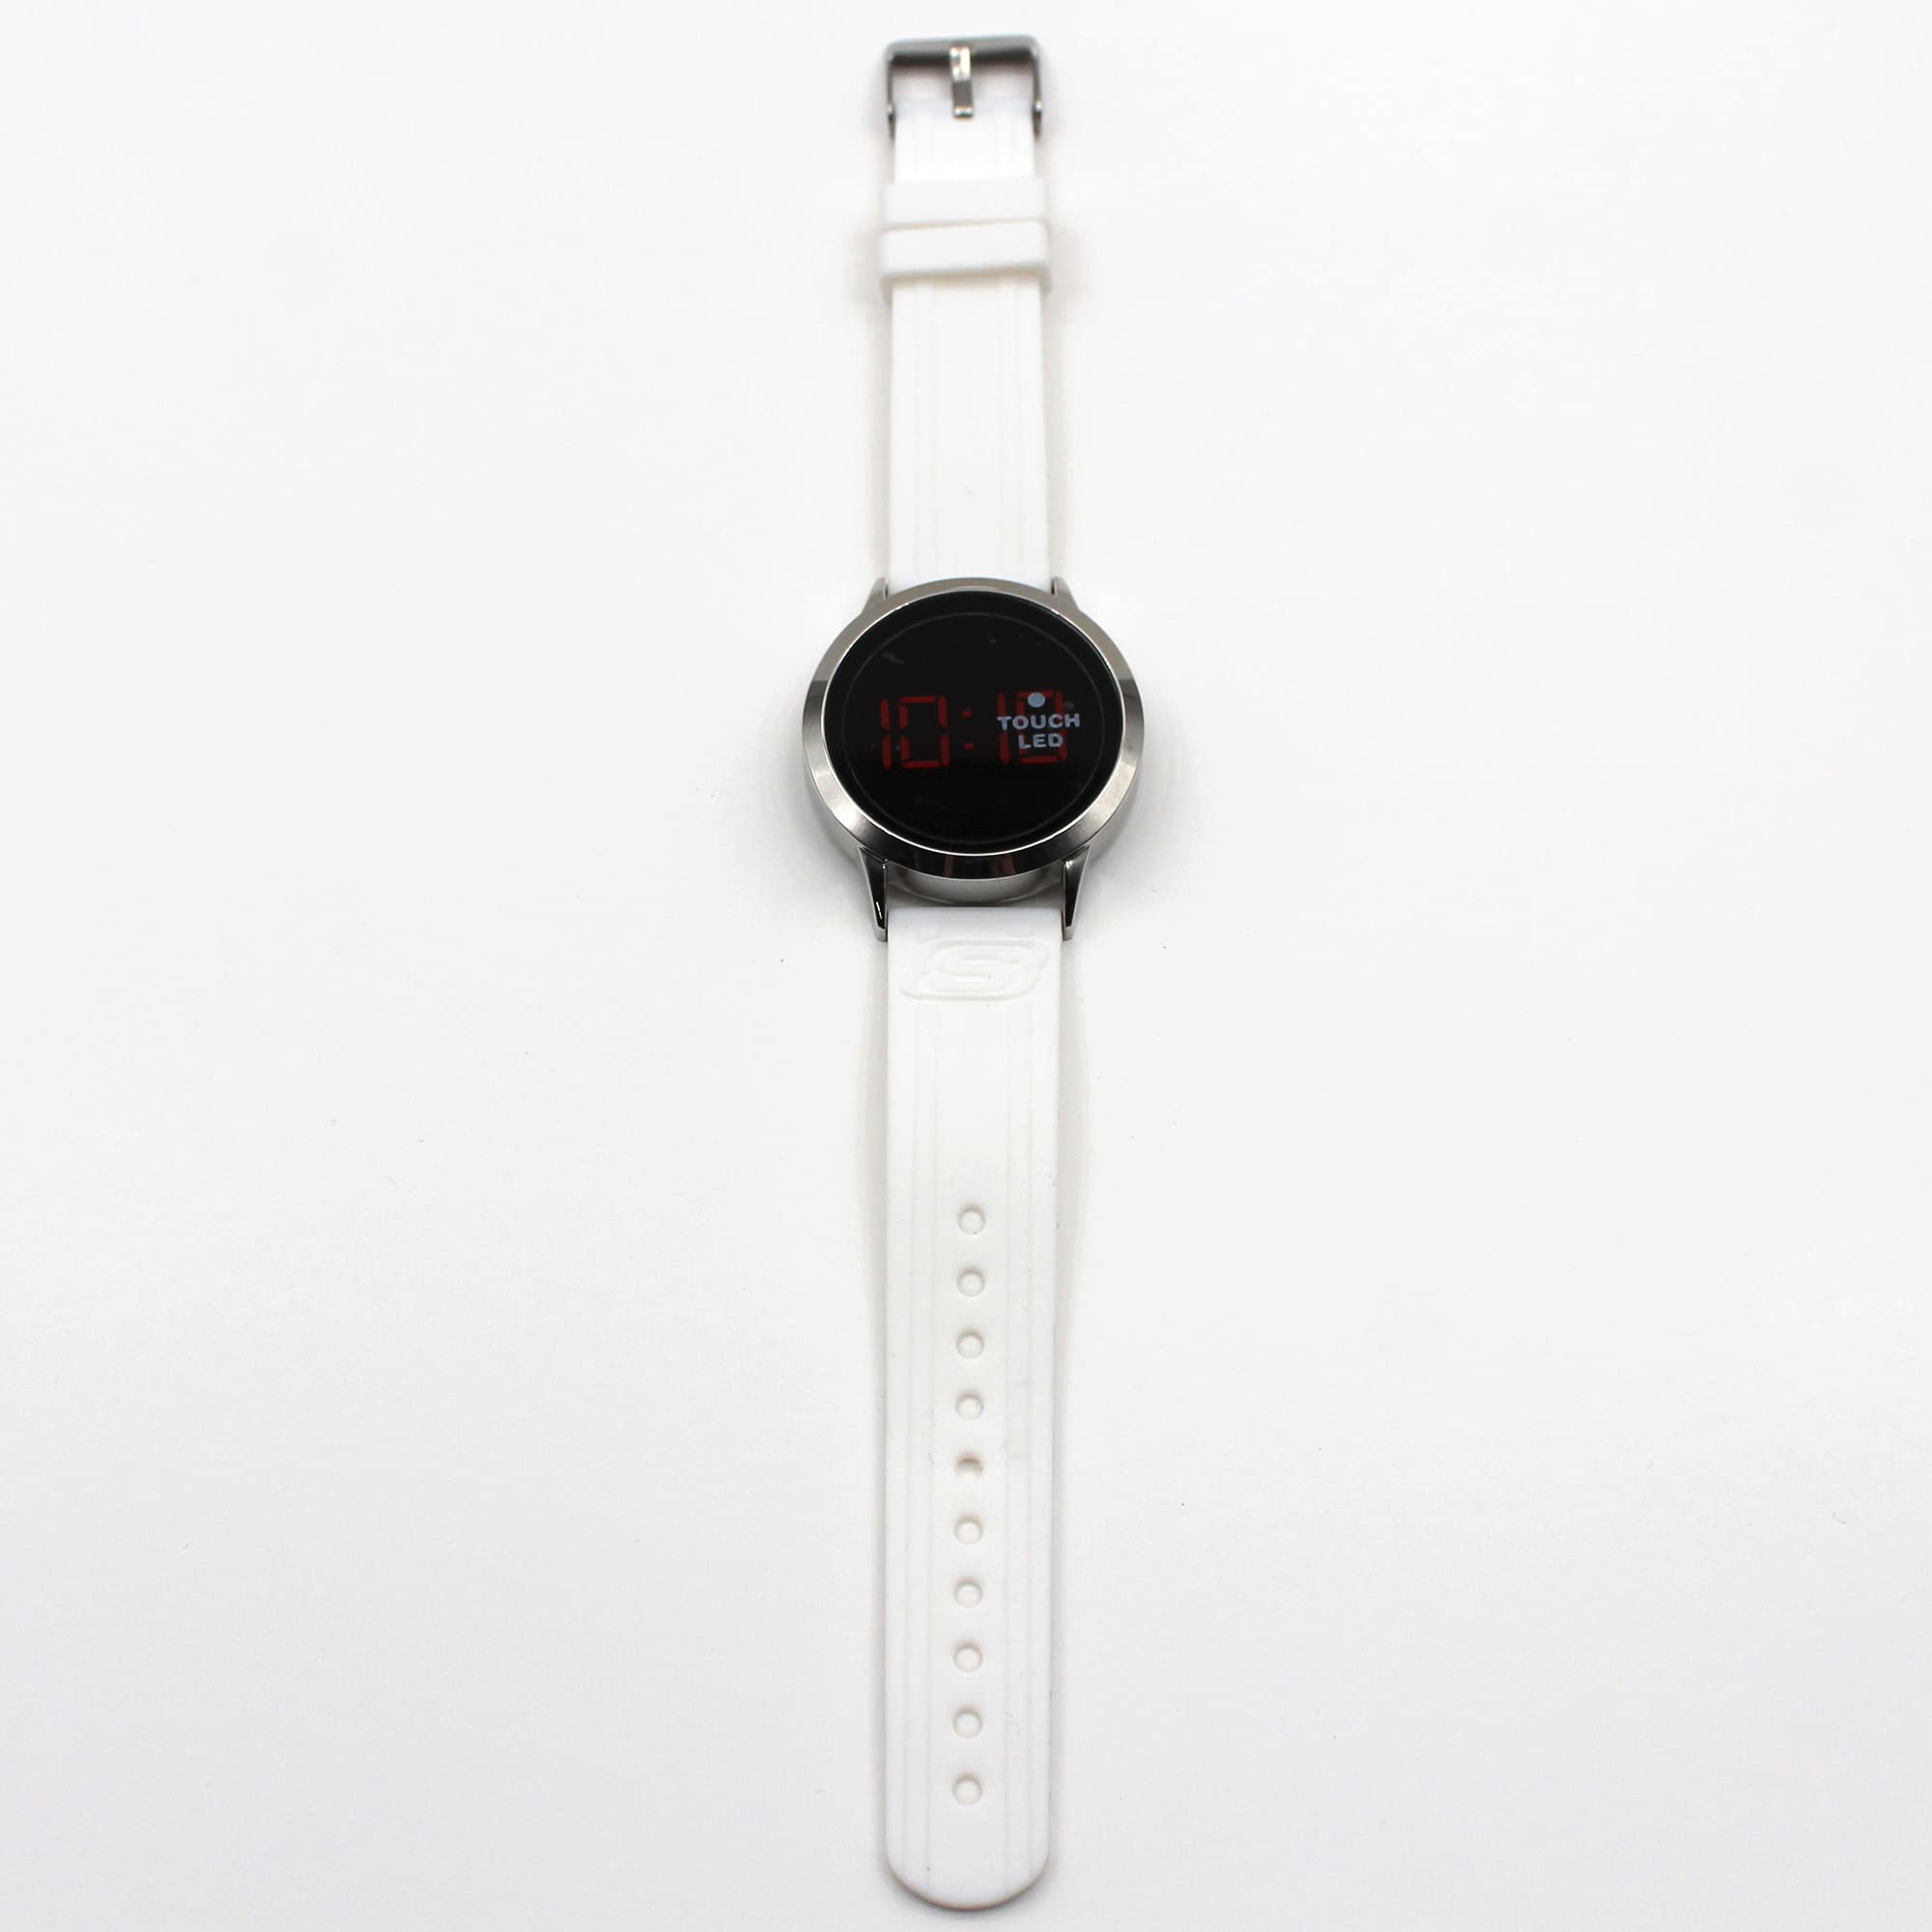 Accutime Skechers White Digital Touch Quartz Watch with Red Digital Display and White Silicone Strap for Kids (Model: SKE4050AZ)